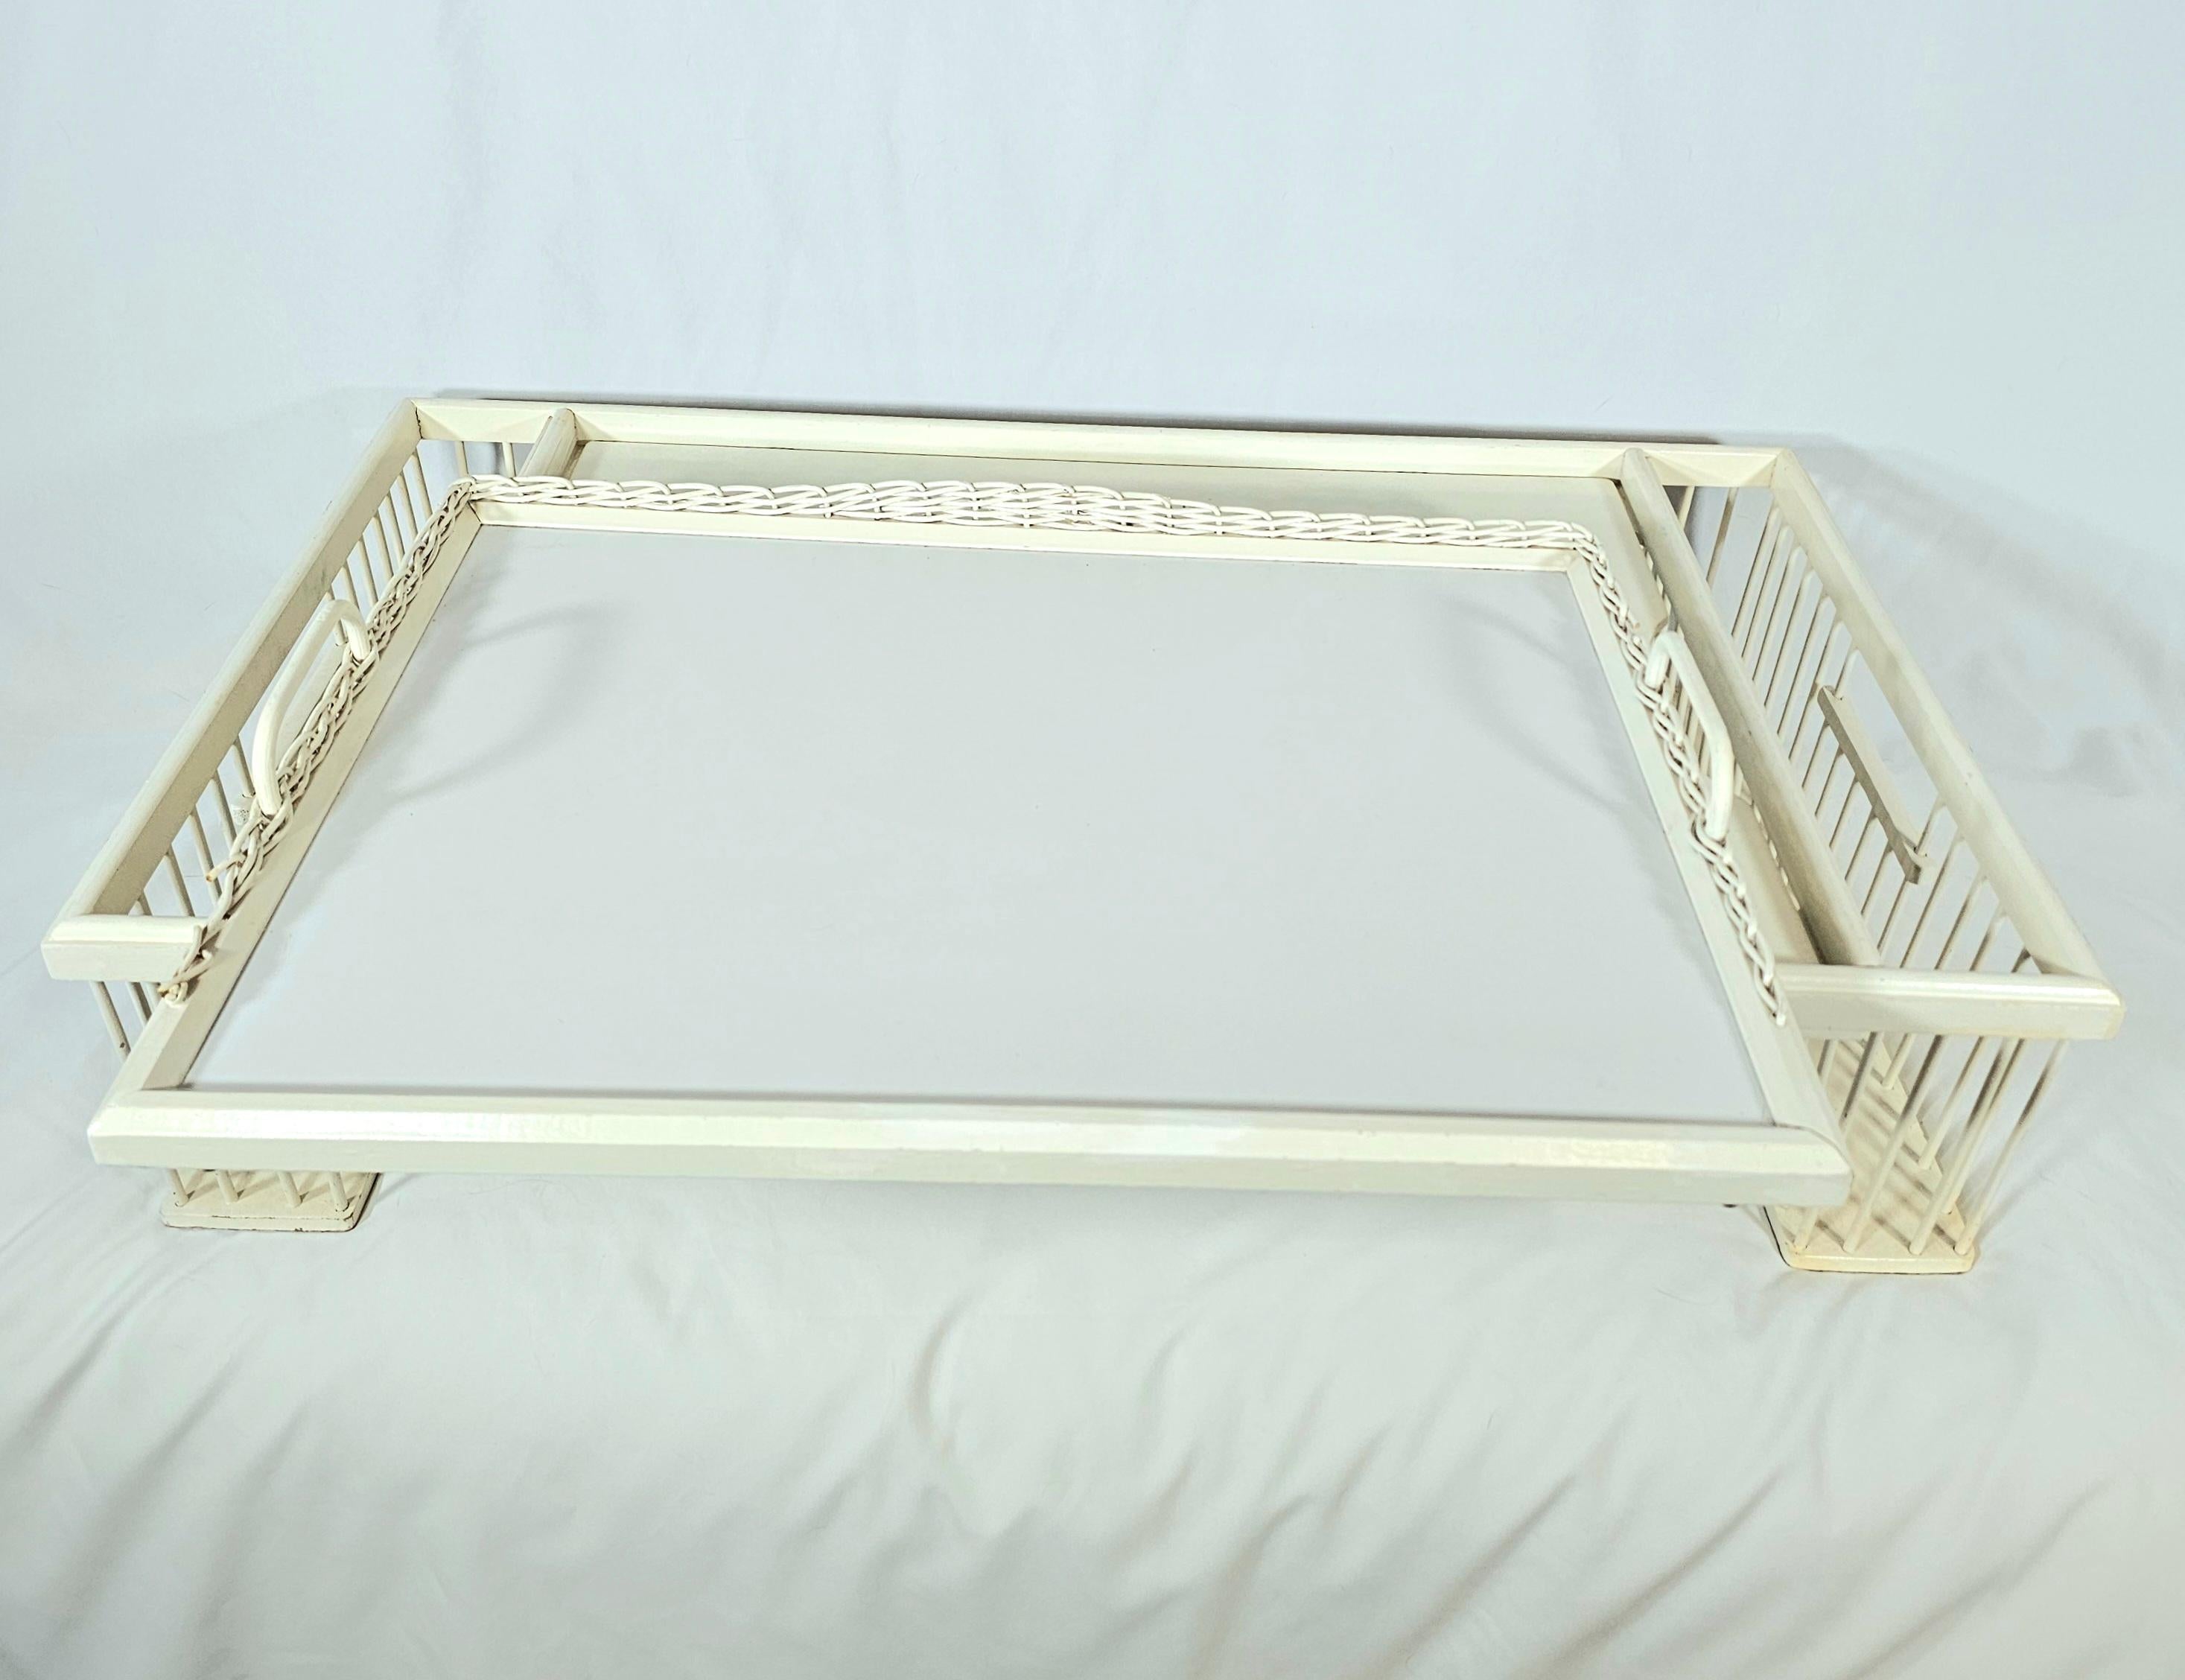 Chinese Mid Century Adjustable Wicker Bed Breakfast Tray For Sale